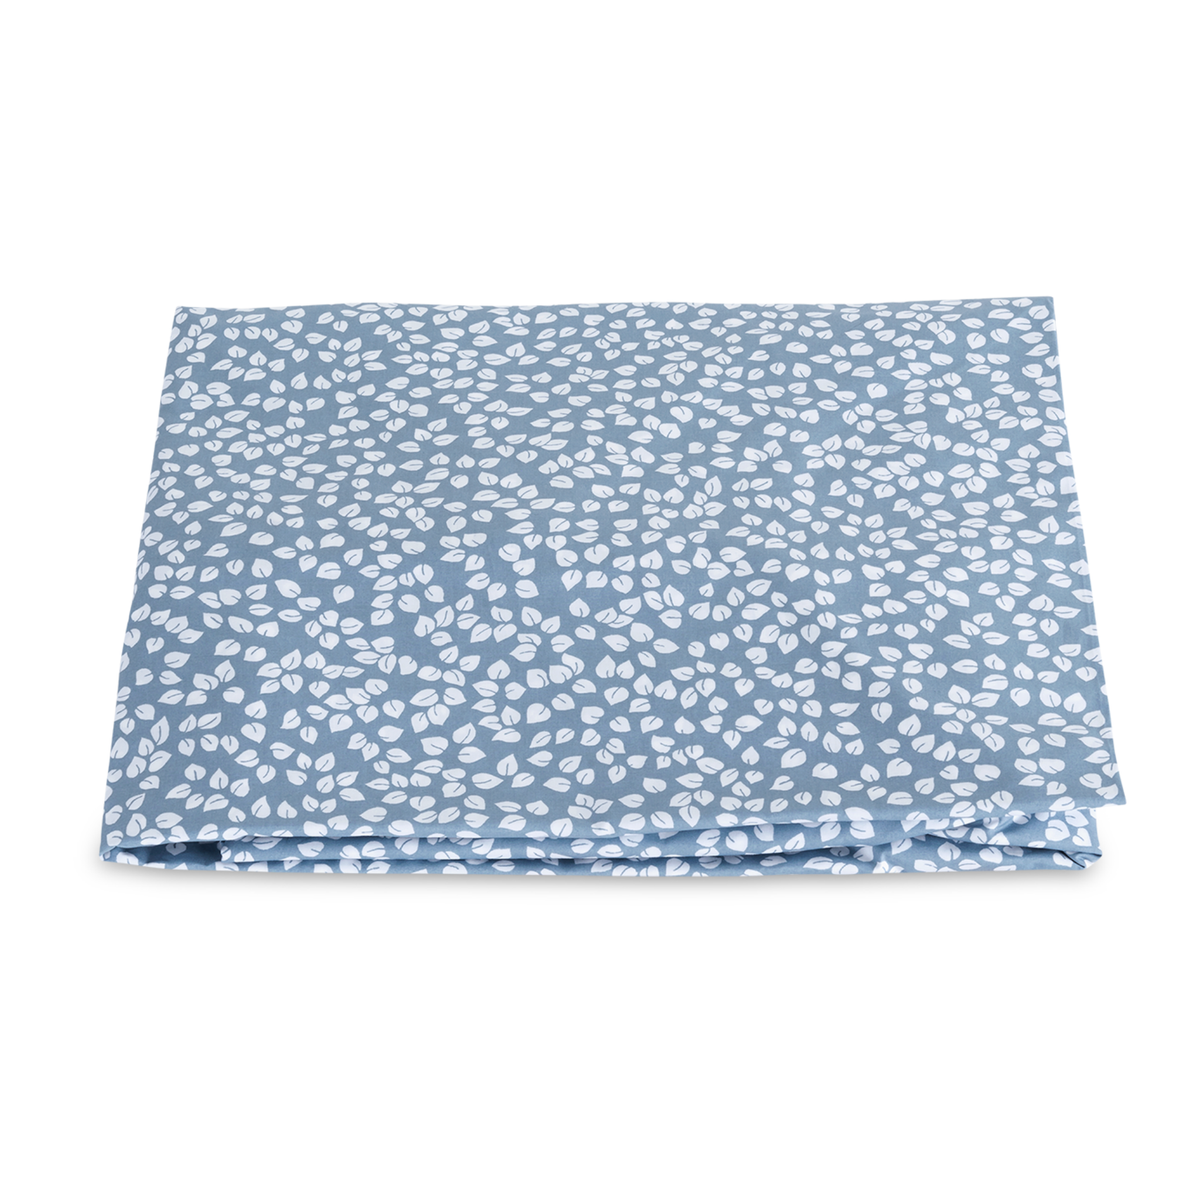 Folded Fitted Sheet of Matouk Margot Bedding in Hazy Blue Reverse Color